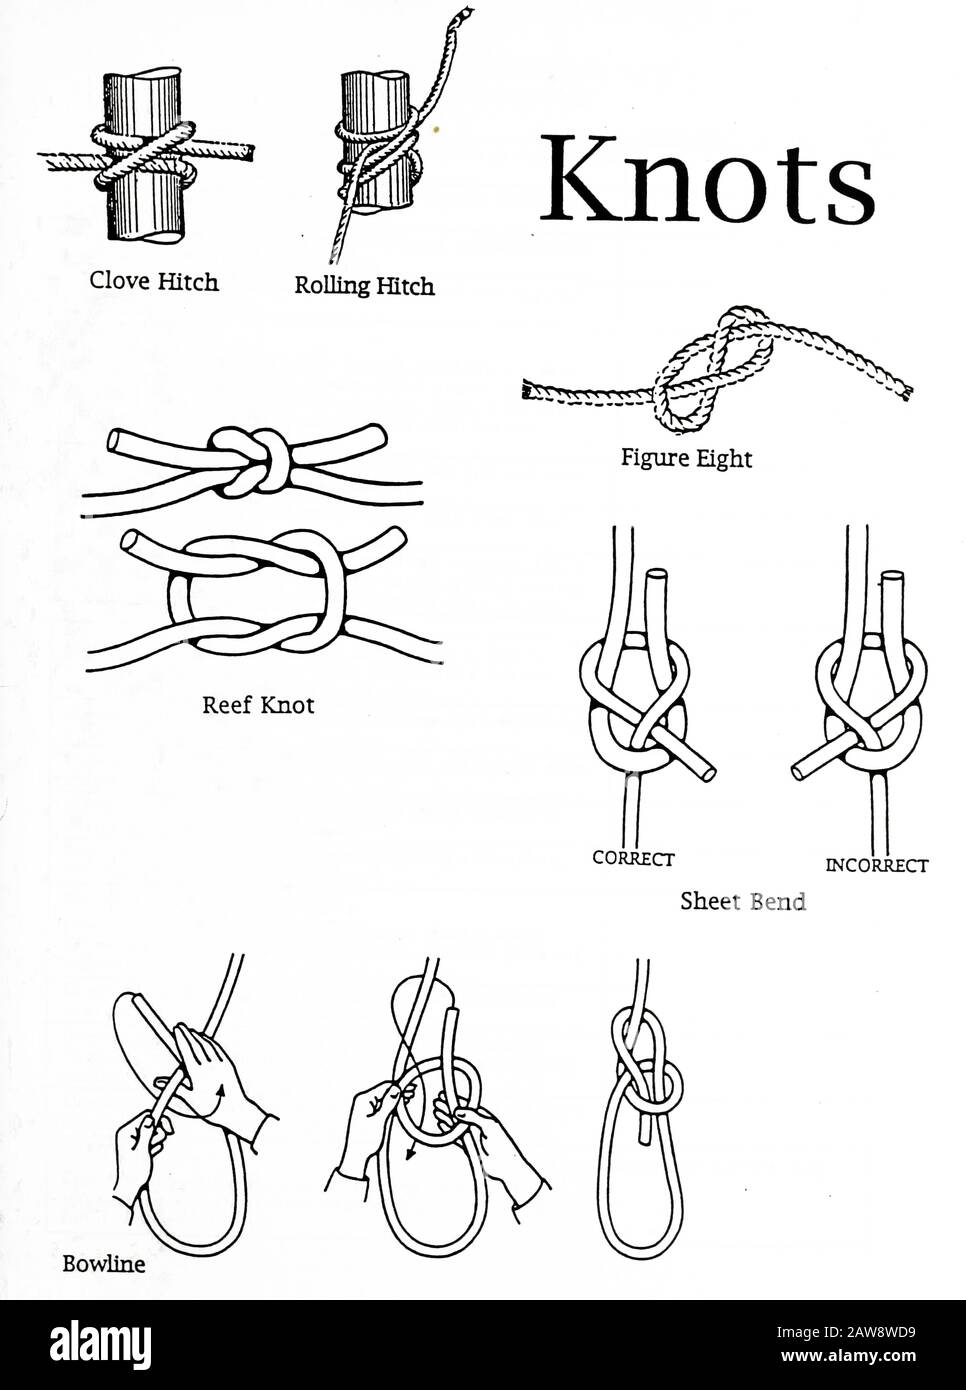 Illustration of a Set of nautical knots with names clove hitch, rolling hitch, reef knot, Sheet bend, bowline and figure eight Stock Photo